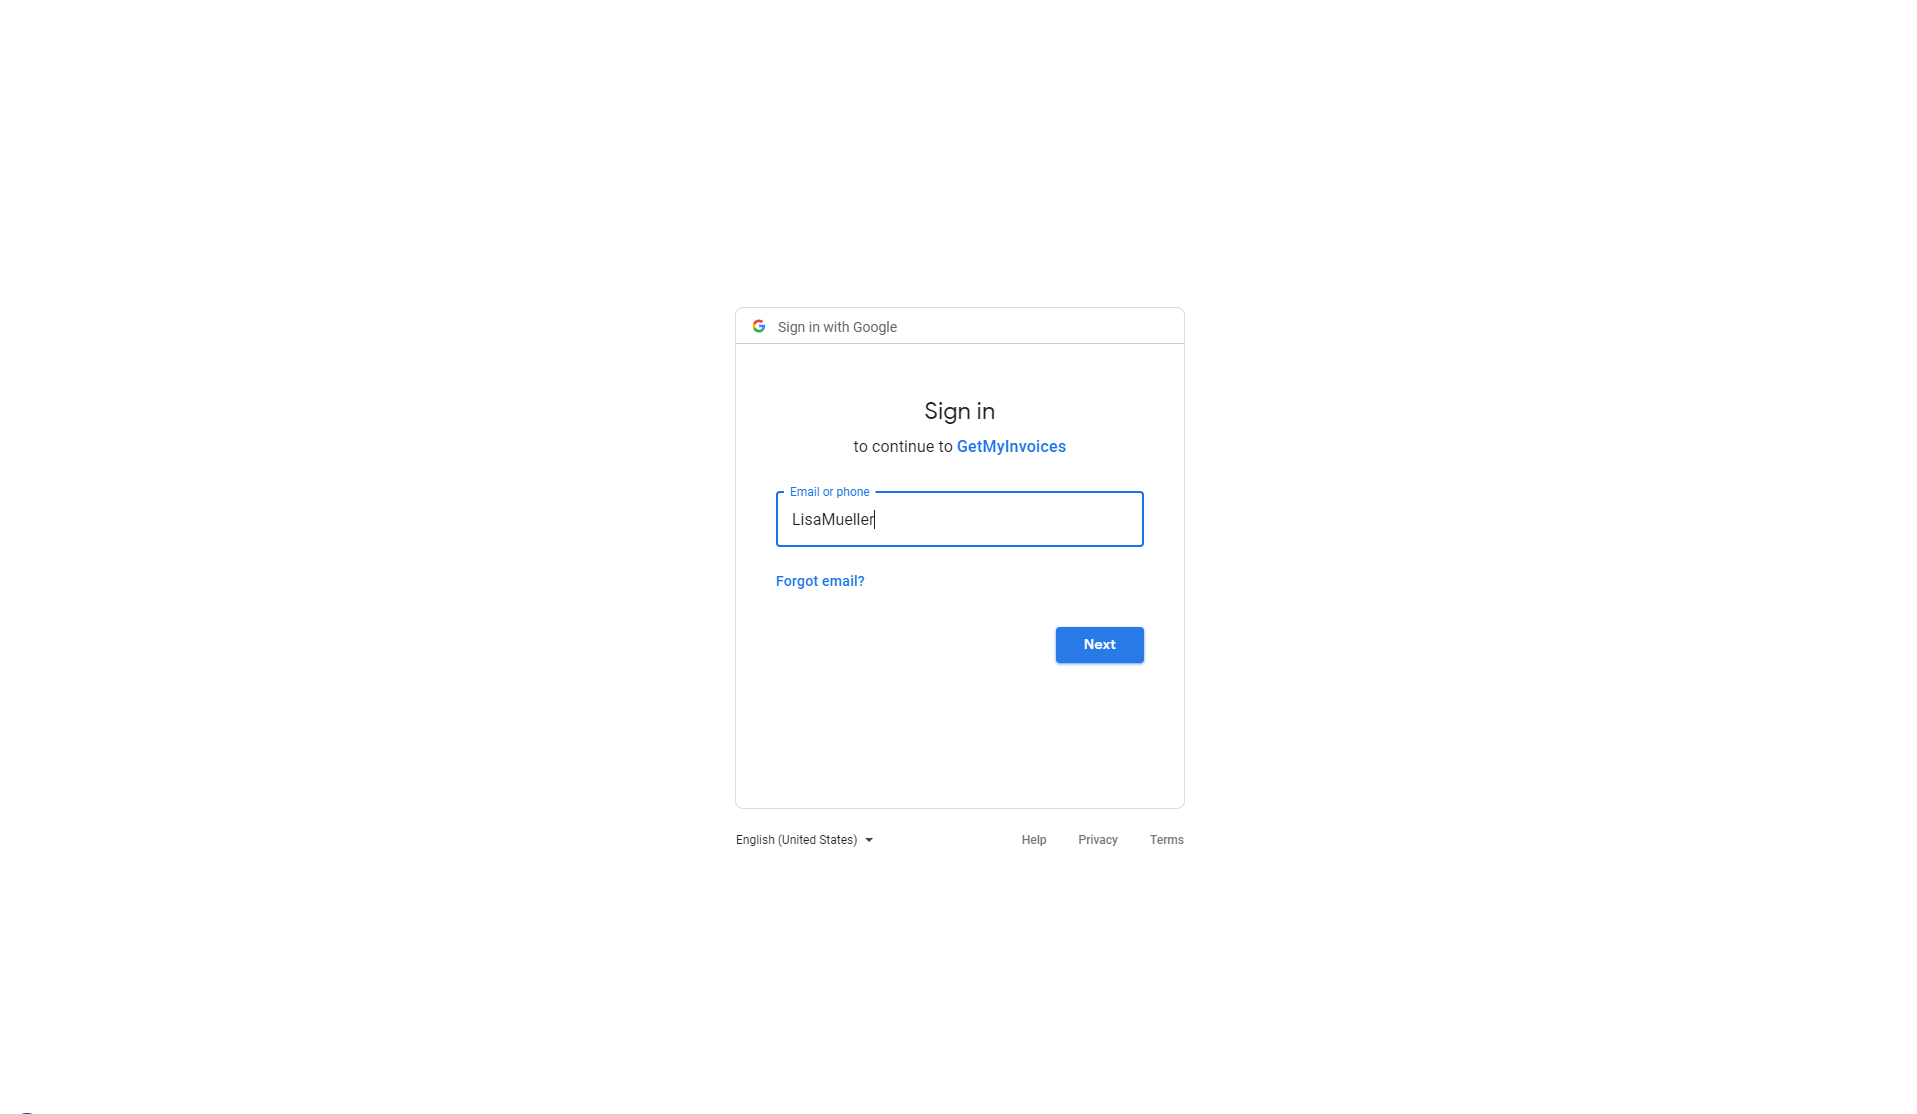 2. Document Import: Connect to Google Drive